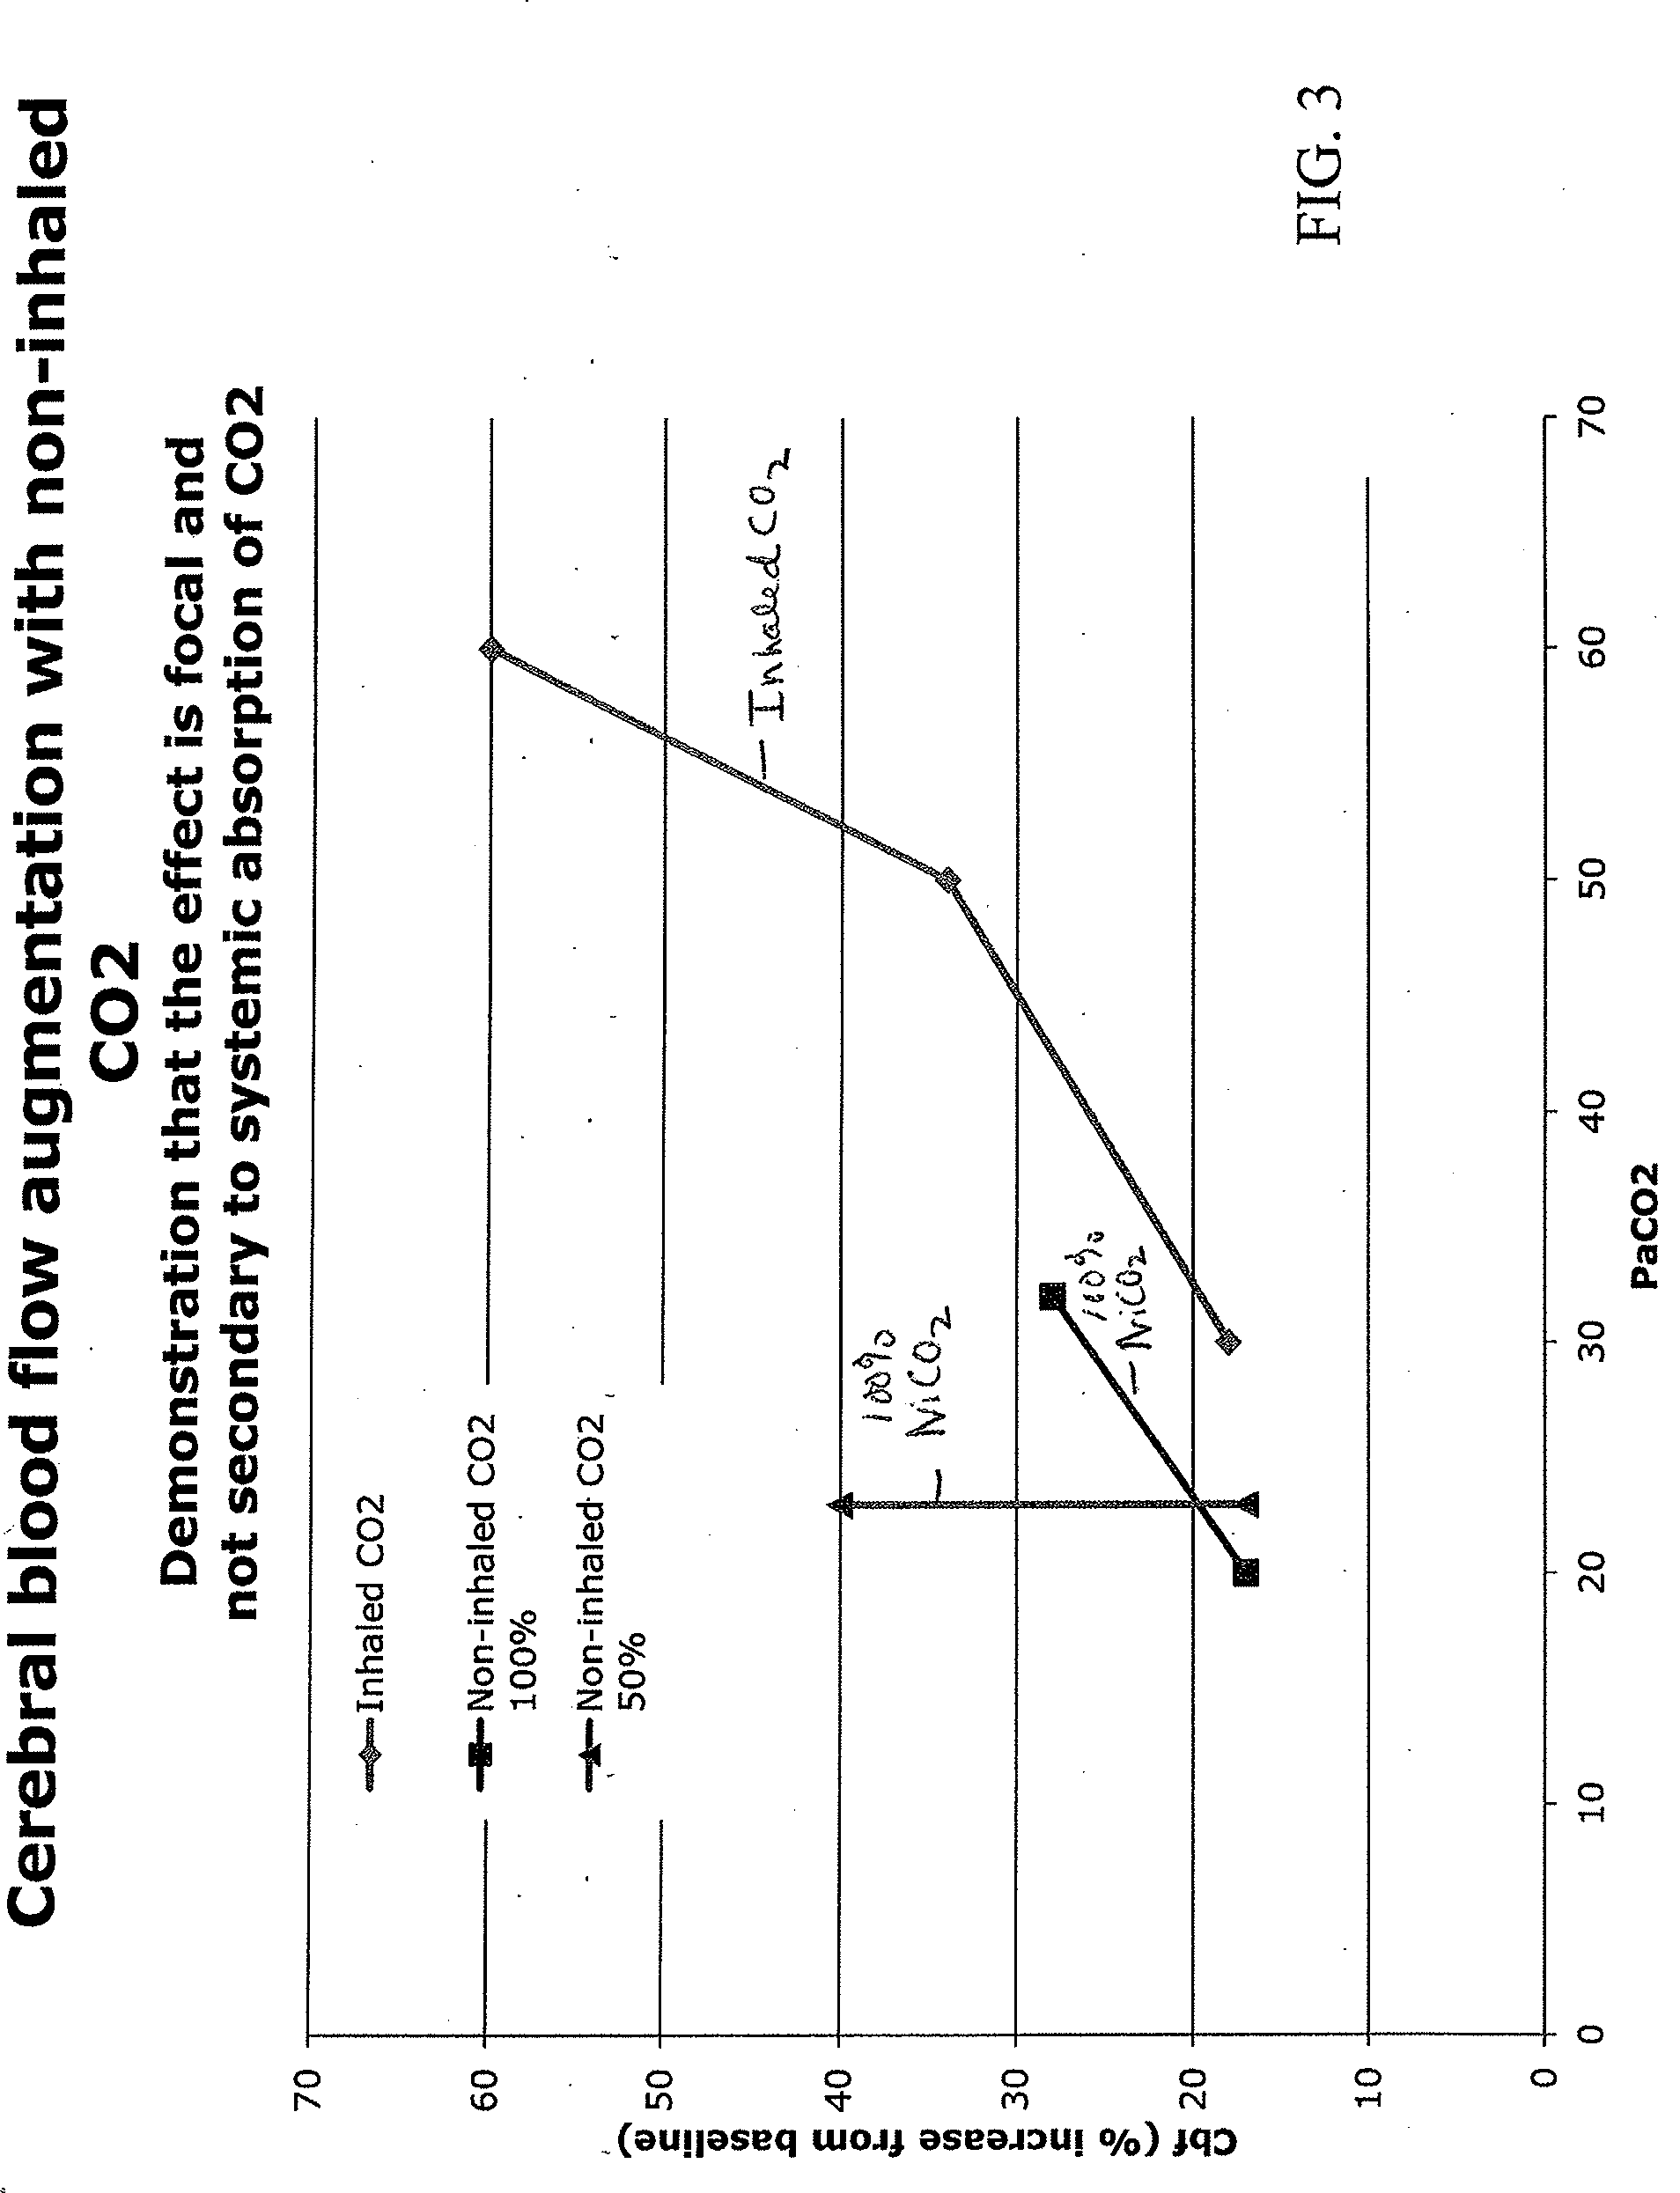 Apparatus and method for treating cerebral ischemia using non-inhaled carbon dioxide